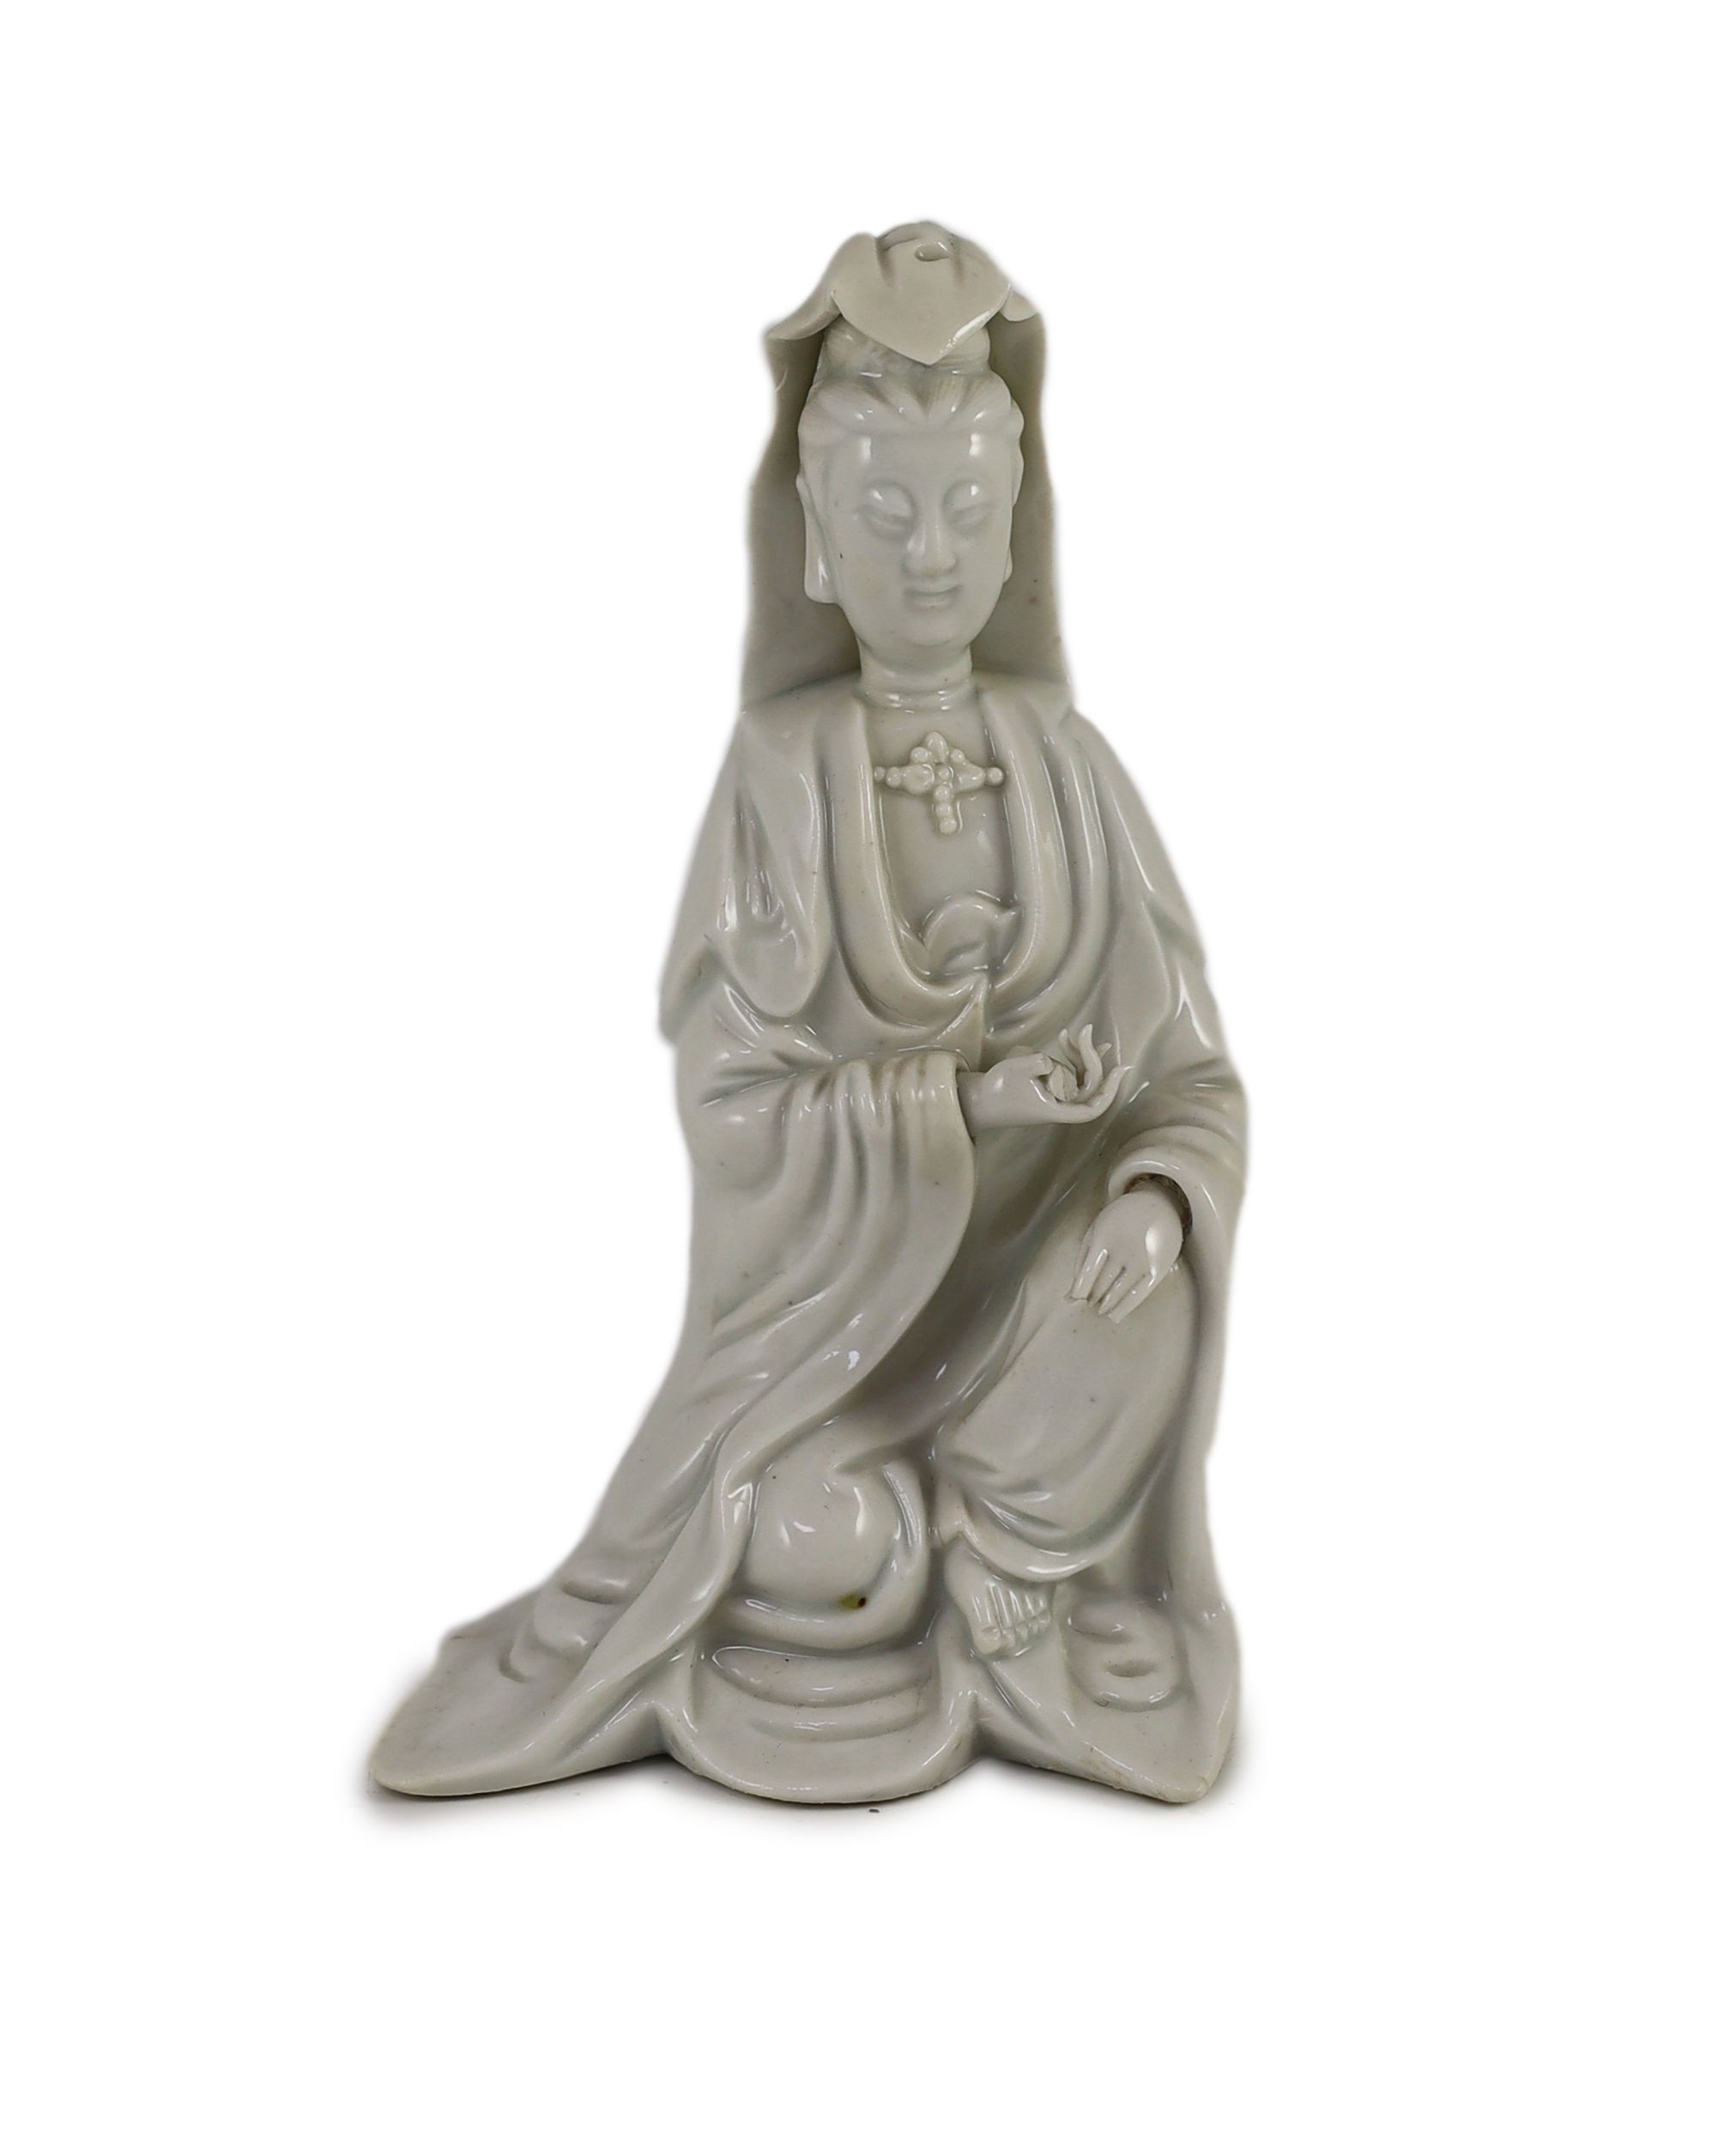 A Chinese blanc-de-chine seated figure of Guanyin, Dehua kilns, 18th century, 19cm high, losses to hand